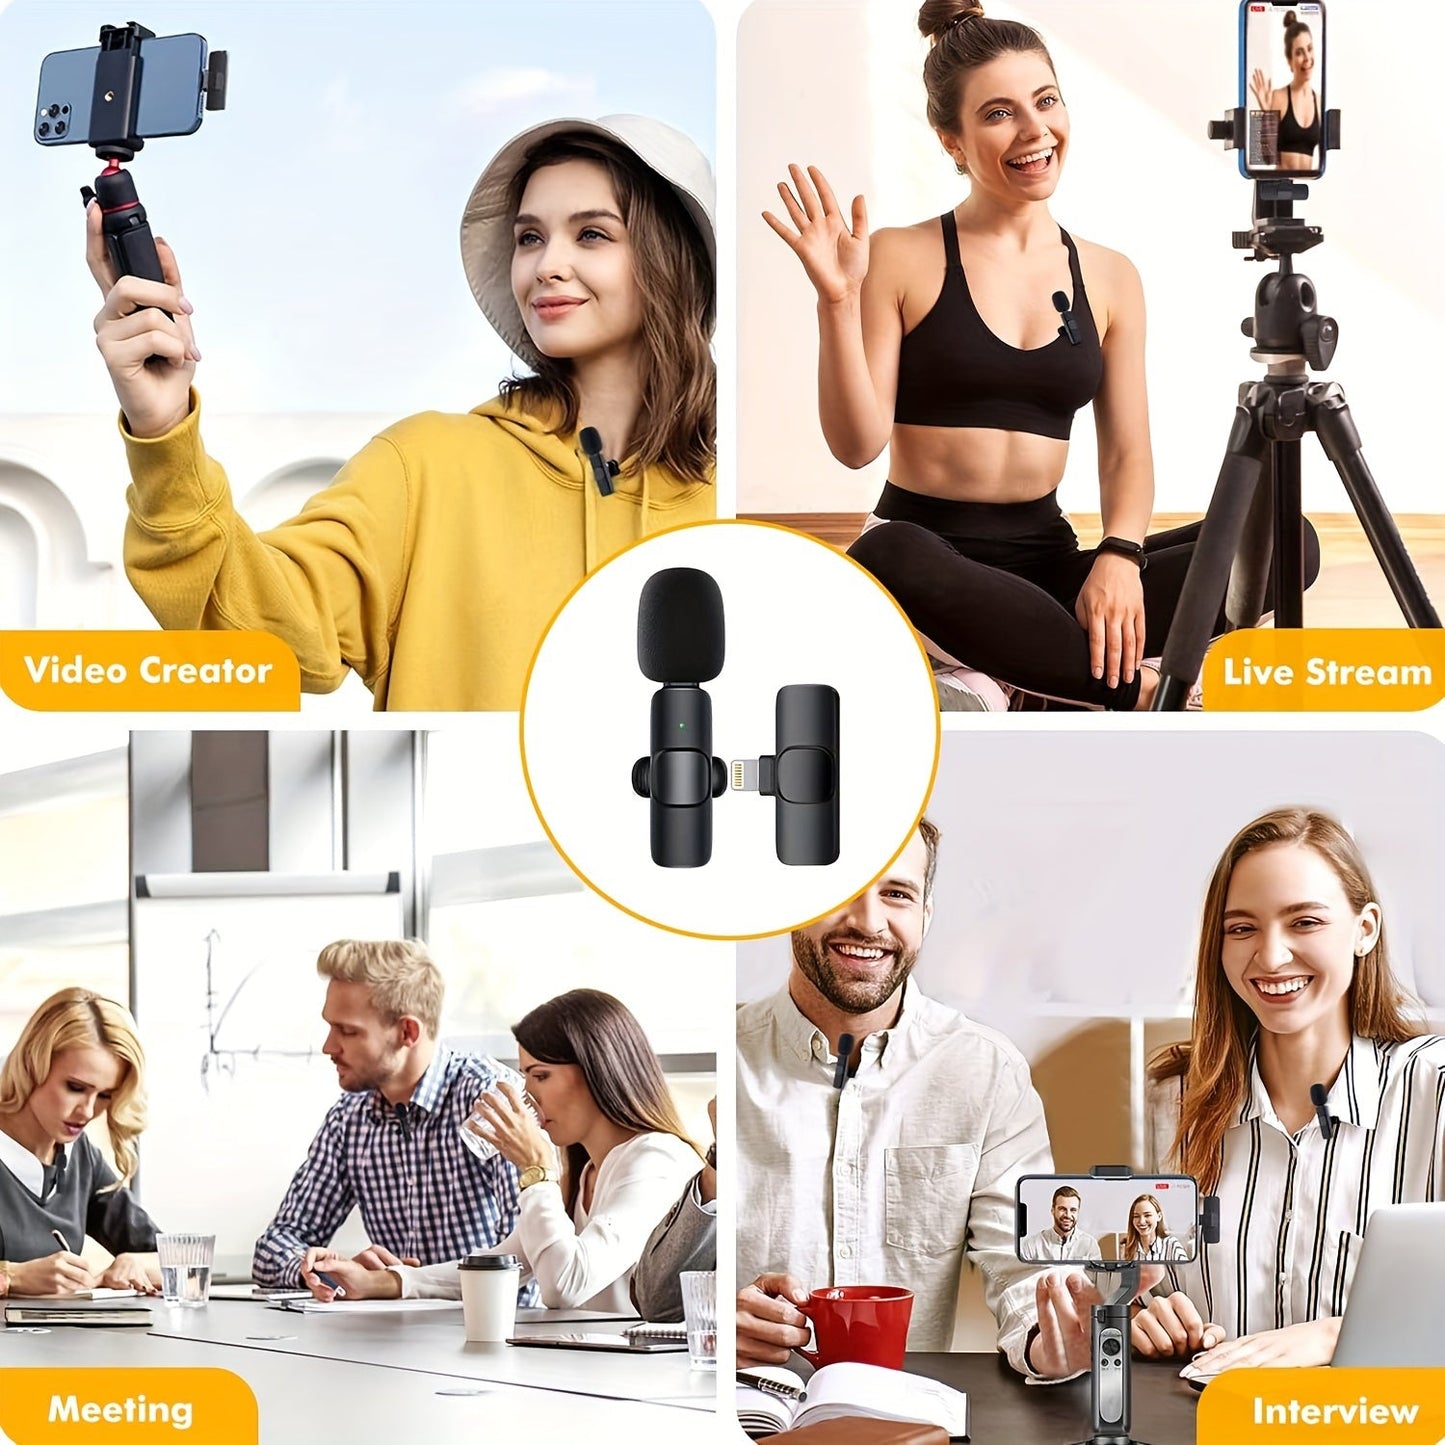 Professional Wireless Lavalier Microphone For IPhone IPad Android Phone Laptop PC Wireless Omnidirectional Condenser Recording Microphone For Interview Video Podcast Vlog